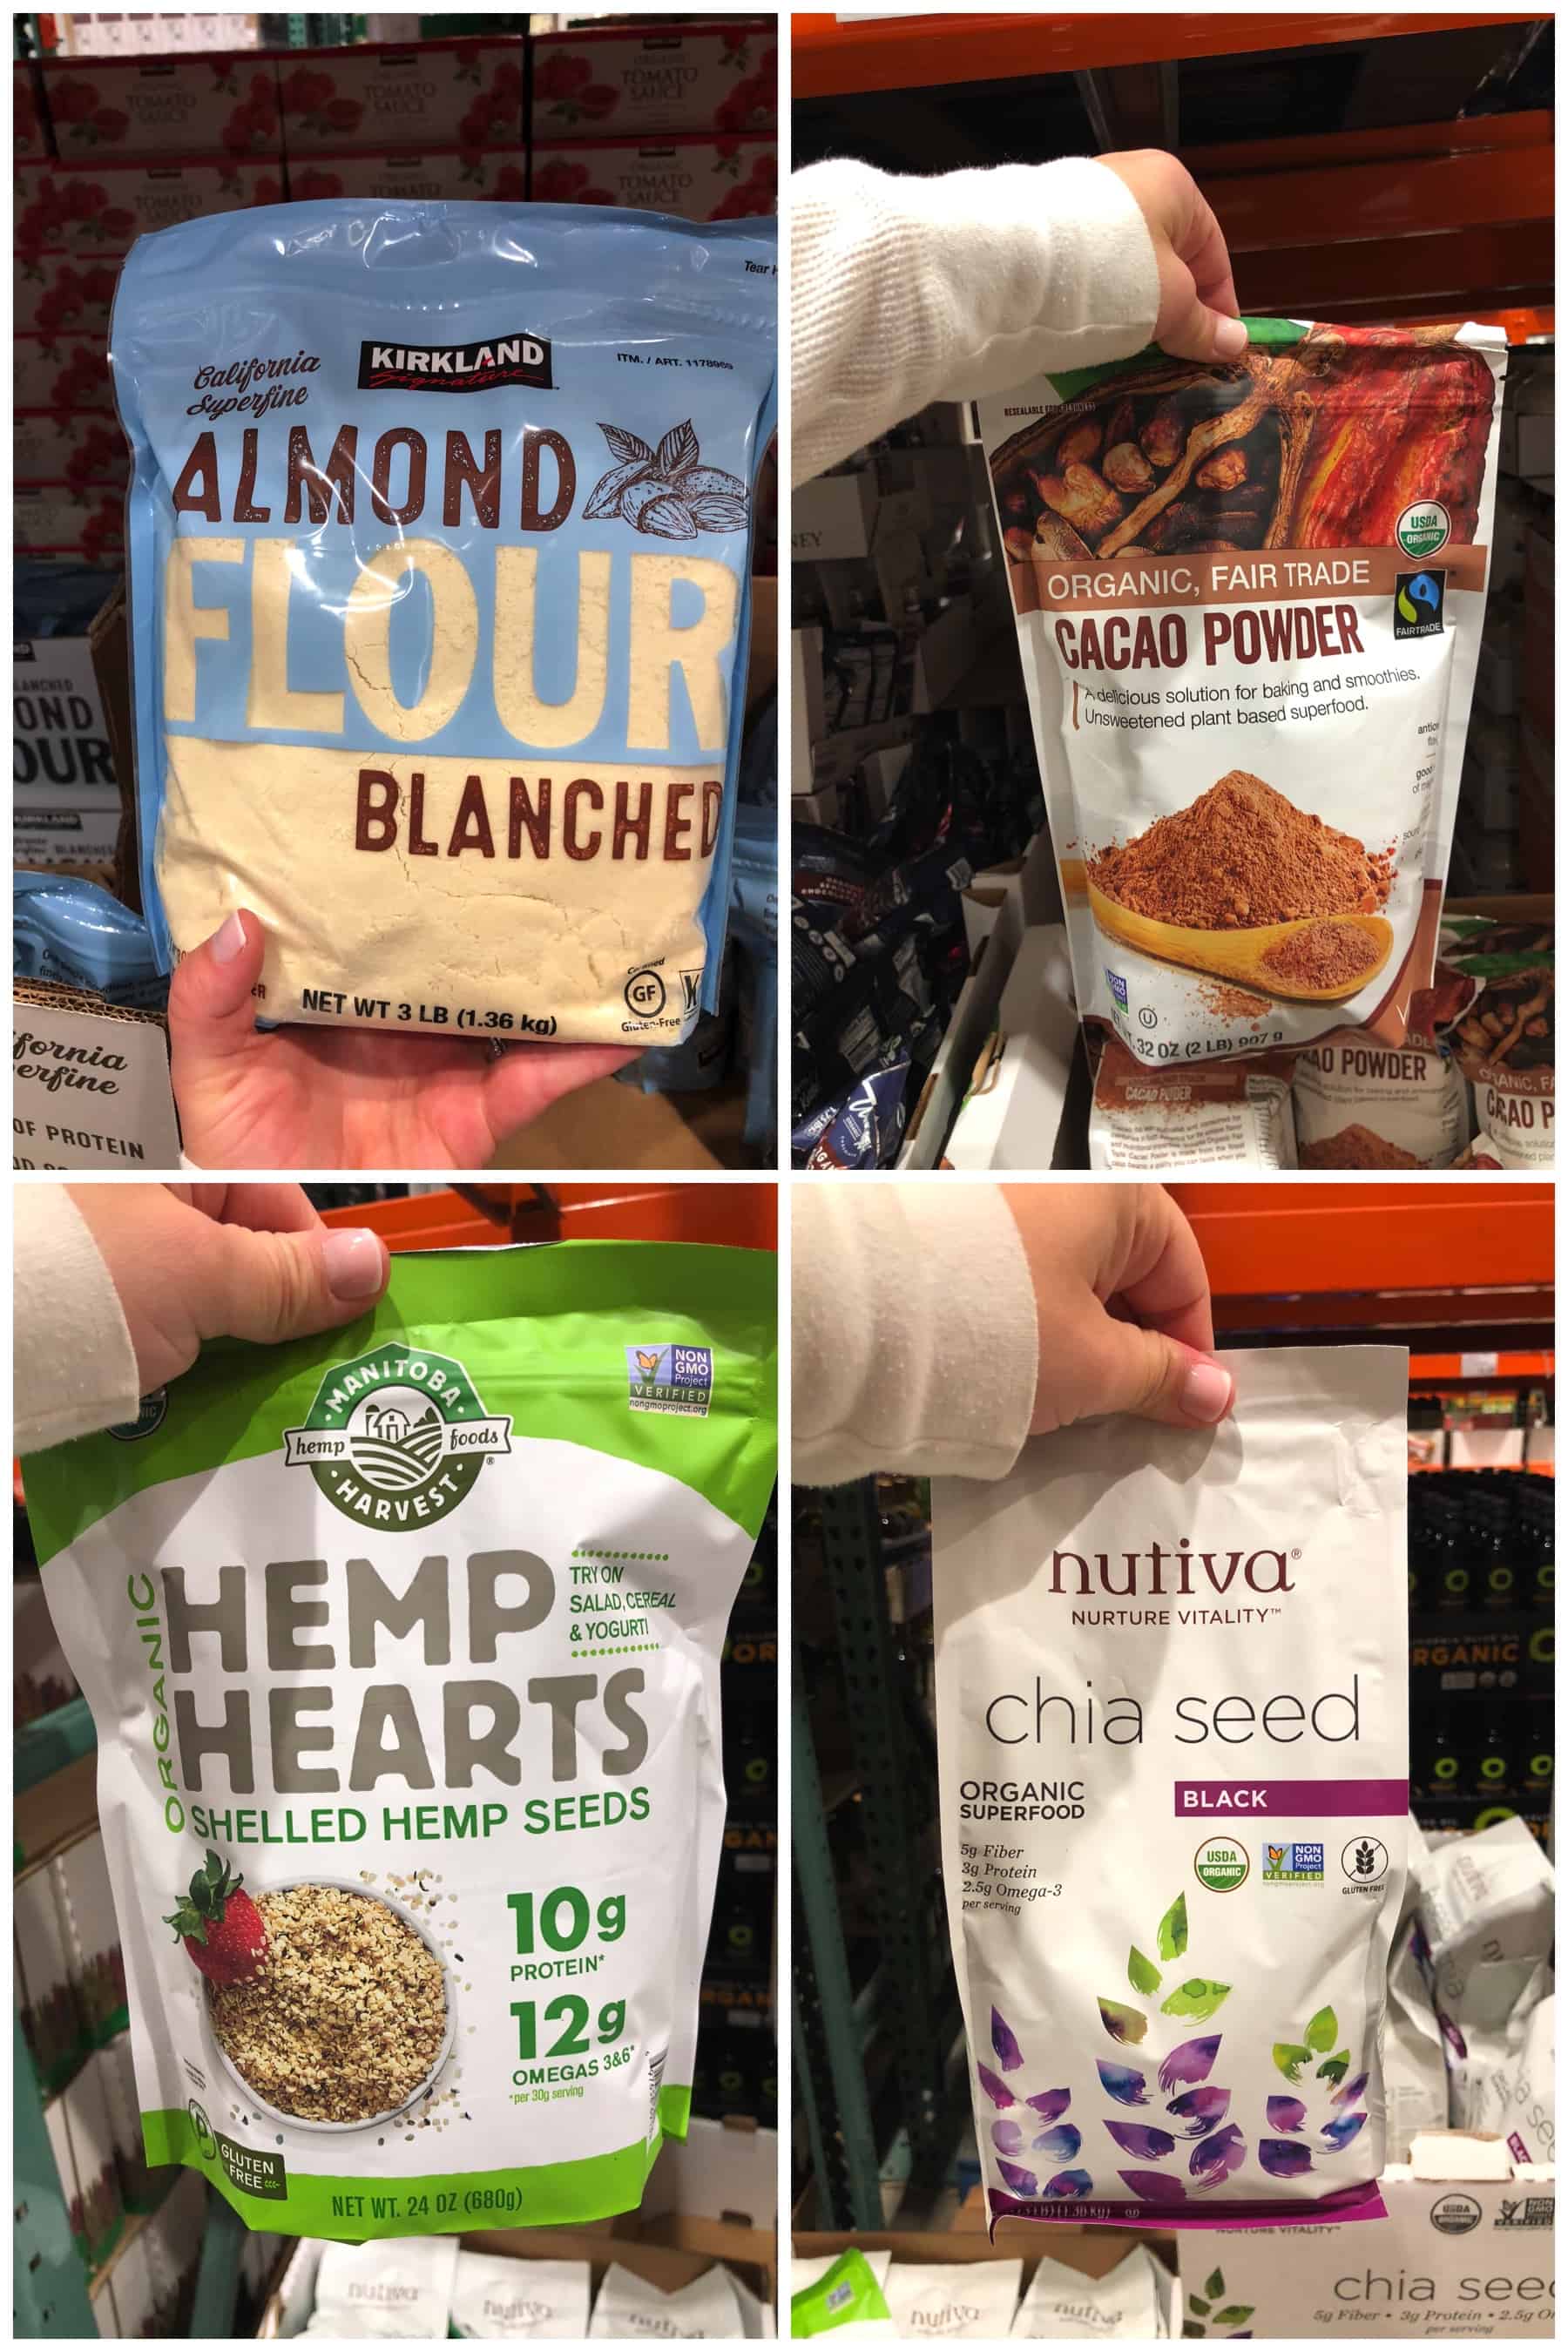 whole30 compliant flours and seeds  for whole30 shopping list at Costco